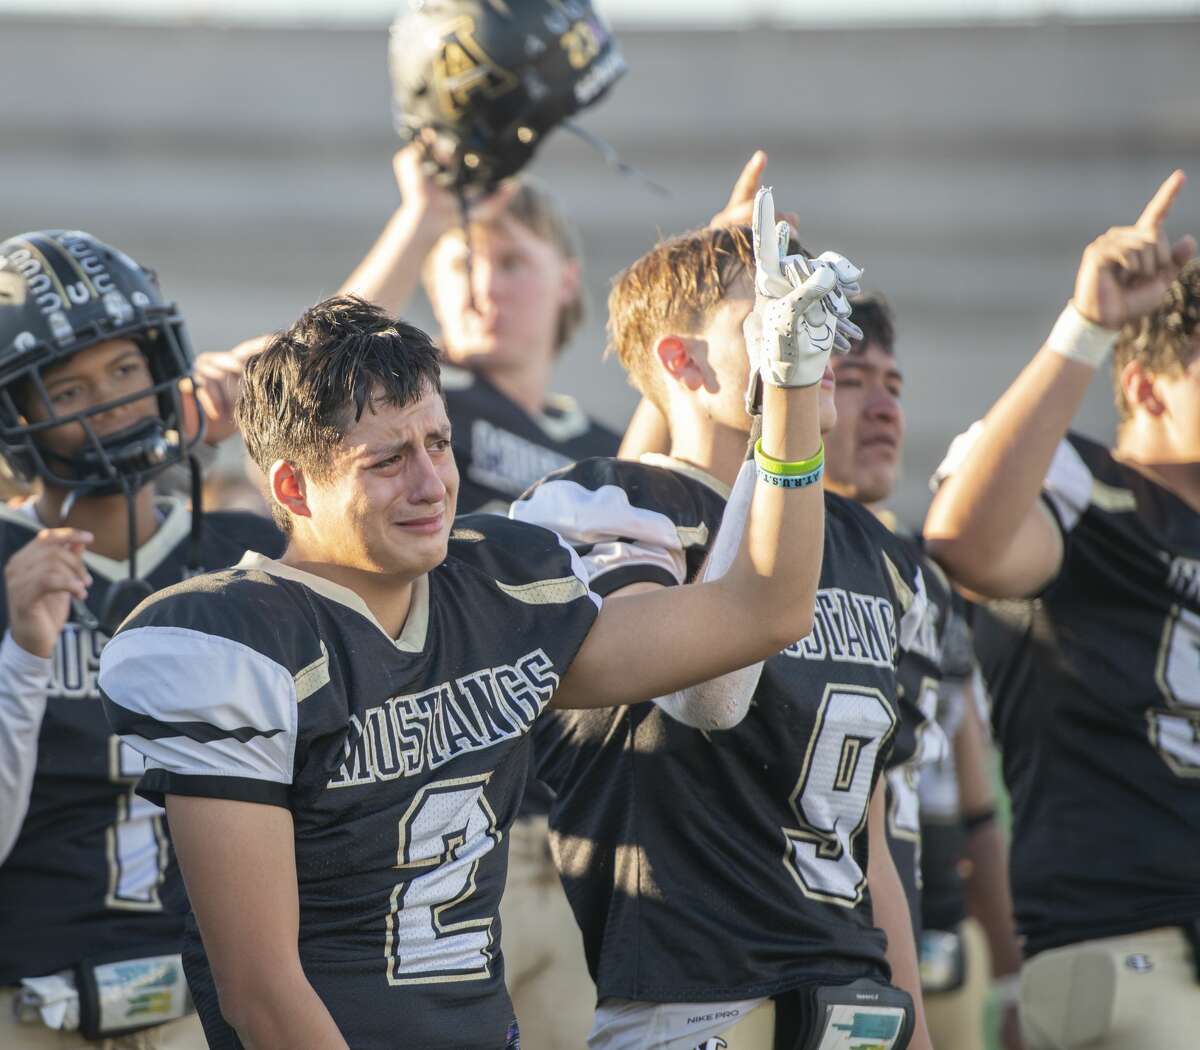 Andrews' players raise their hands as the Big Spring and Sweetwater bands play the Andrews school song following the 43-33 loss to Springtown 11/22/2021 at the Class 4A Division 1 area playoff at the Mustang Bowl in Sweetwater, Texas. Tim Fischer/Reporter-Telegram